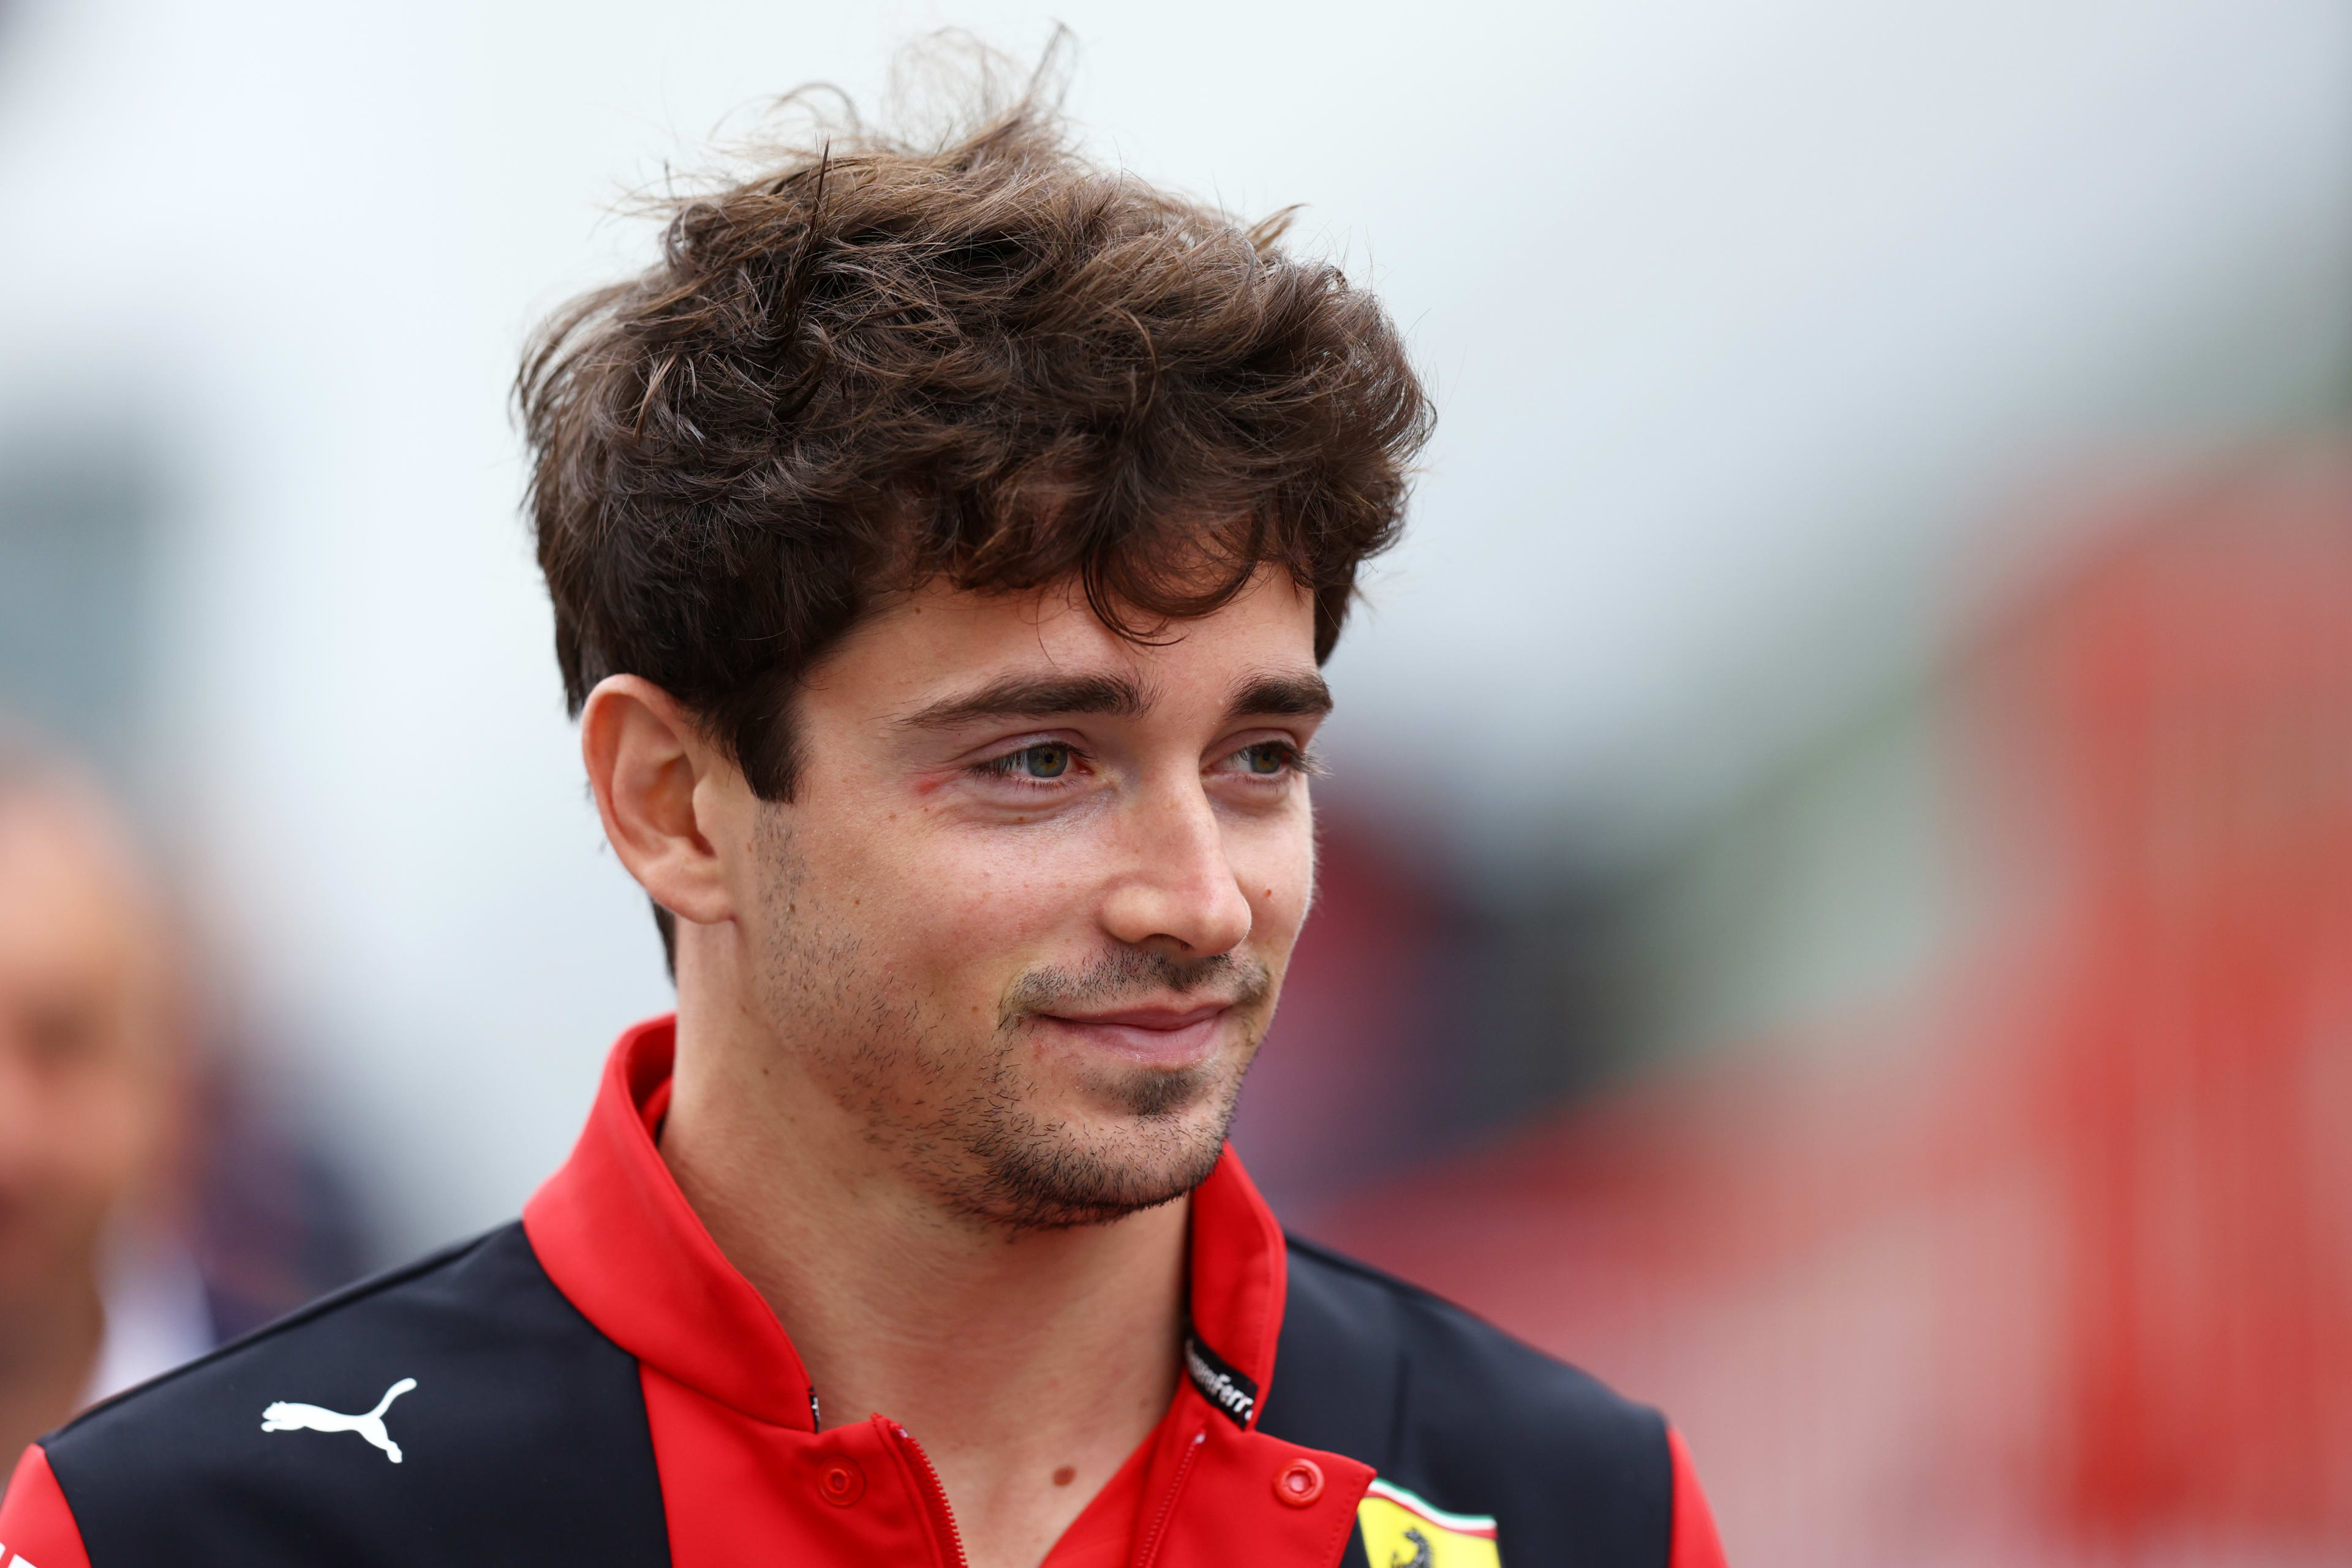 Leclerc admits he was 'very surprised' by positive reaction to his